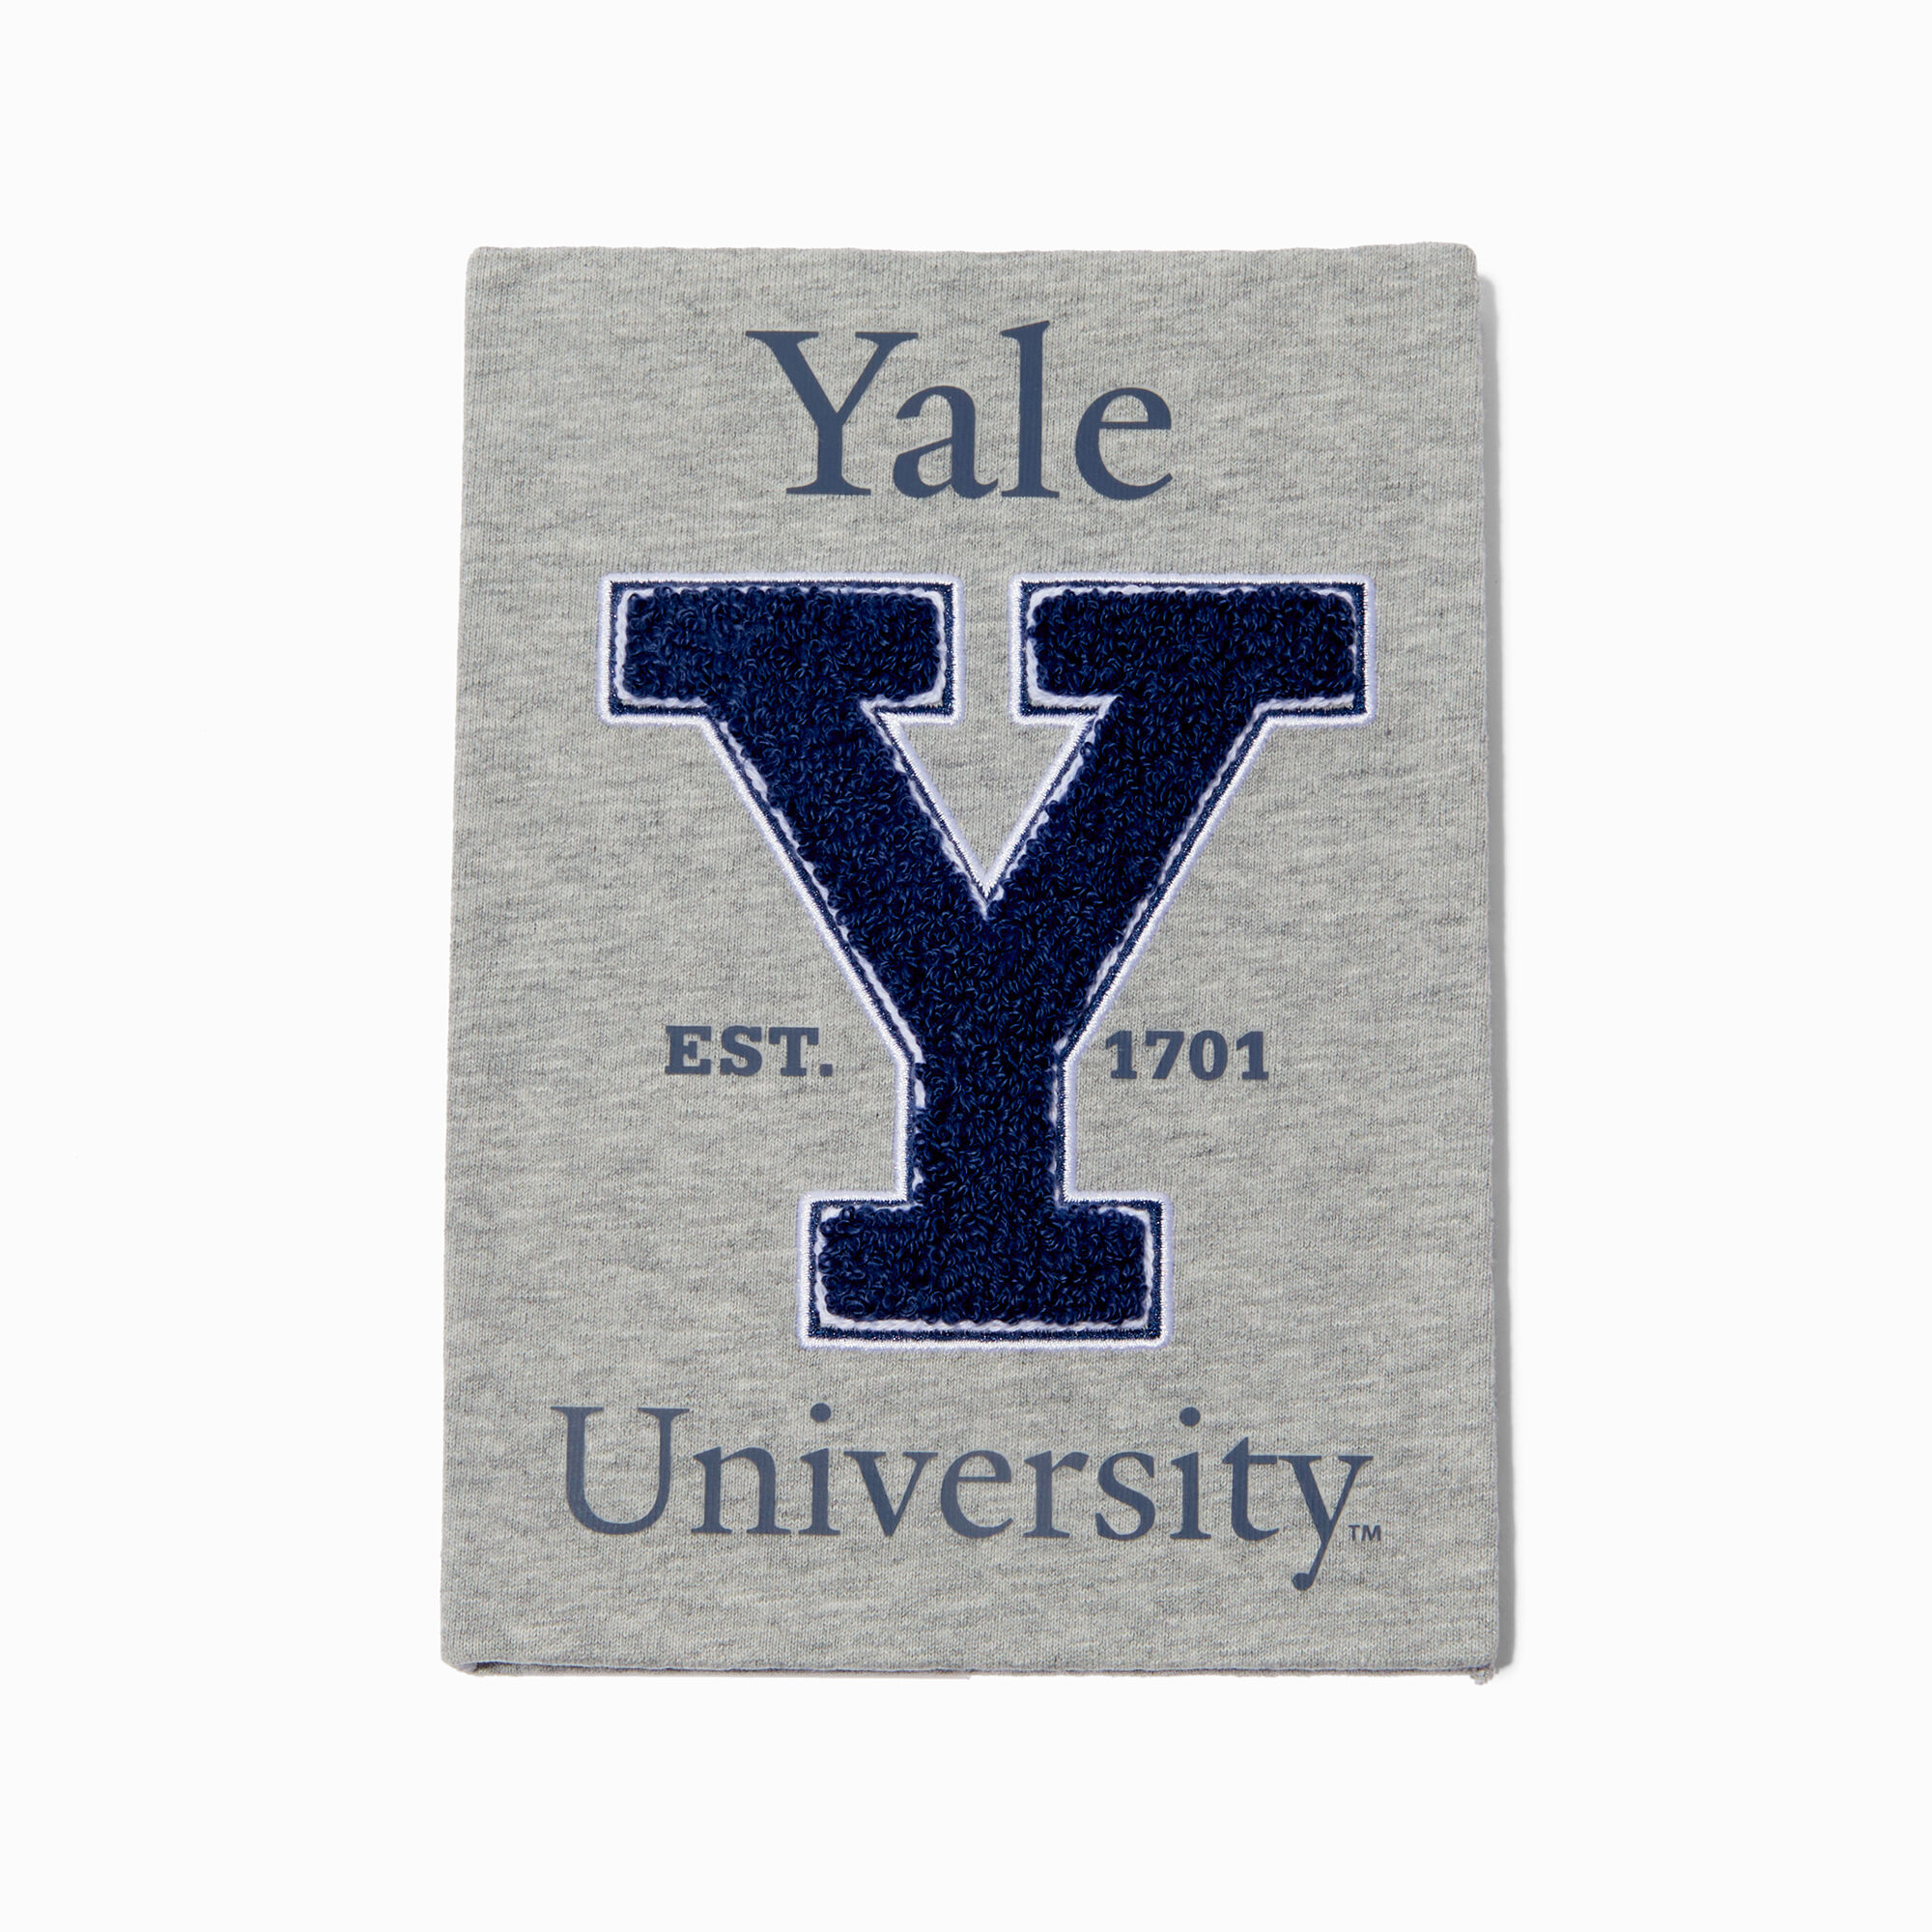 View Claires Yale Notebook information